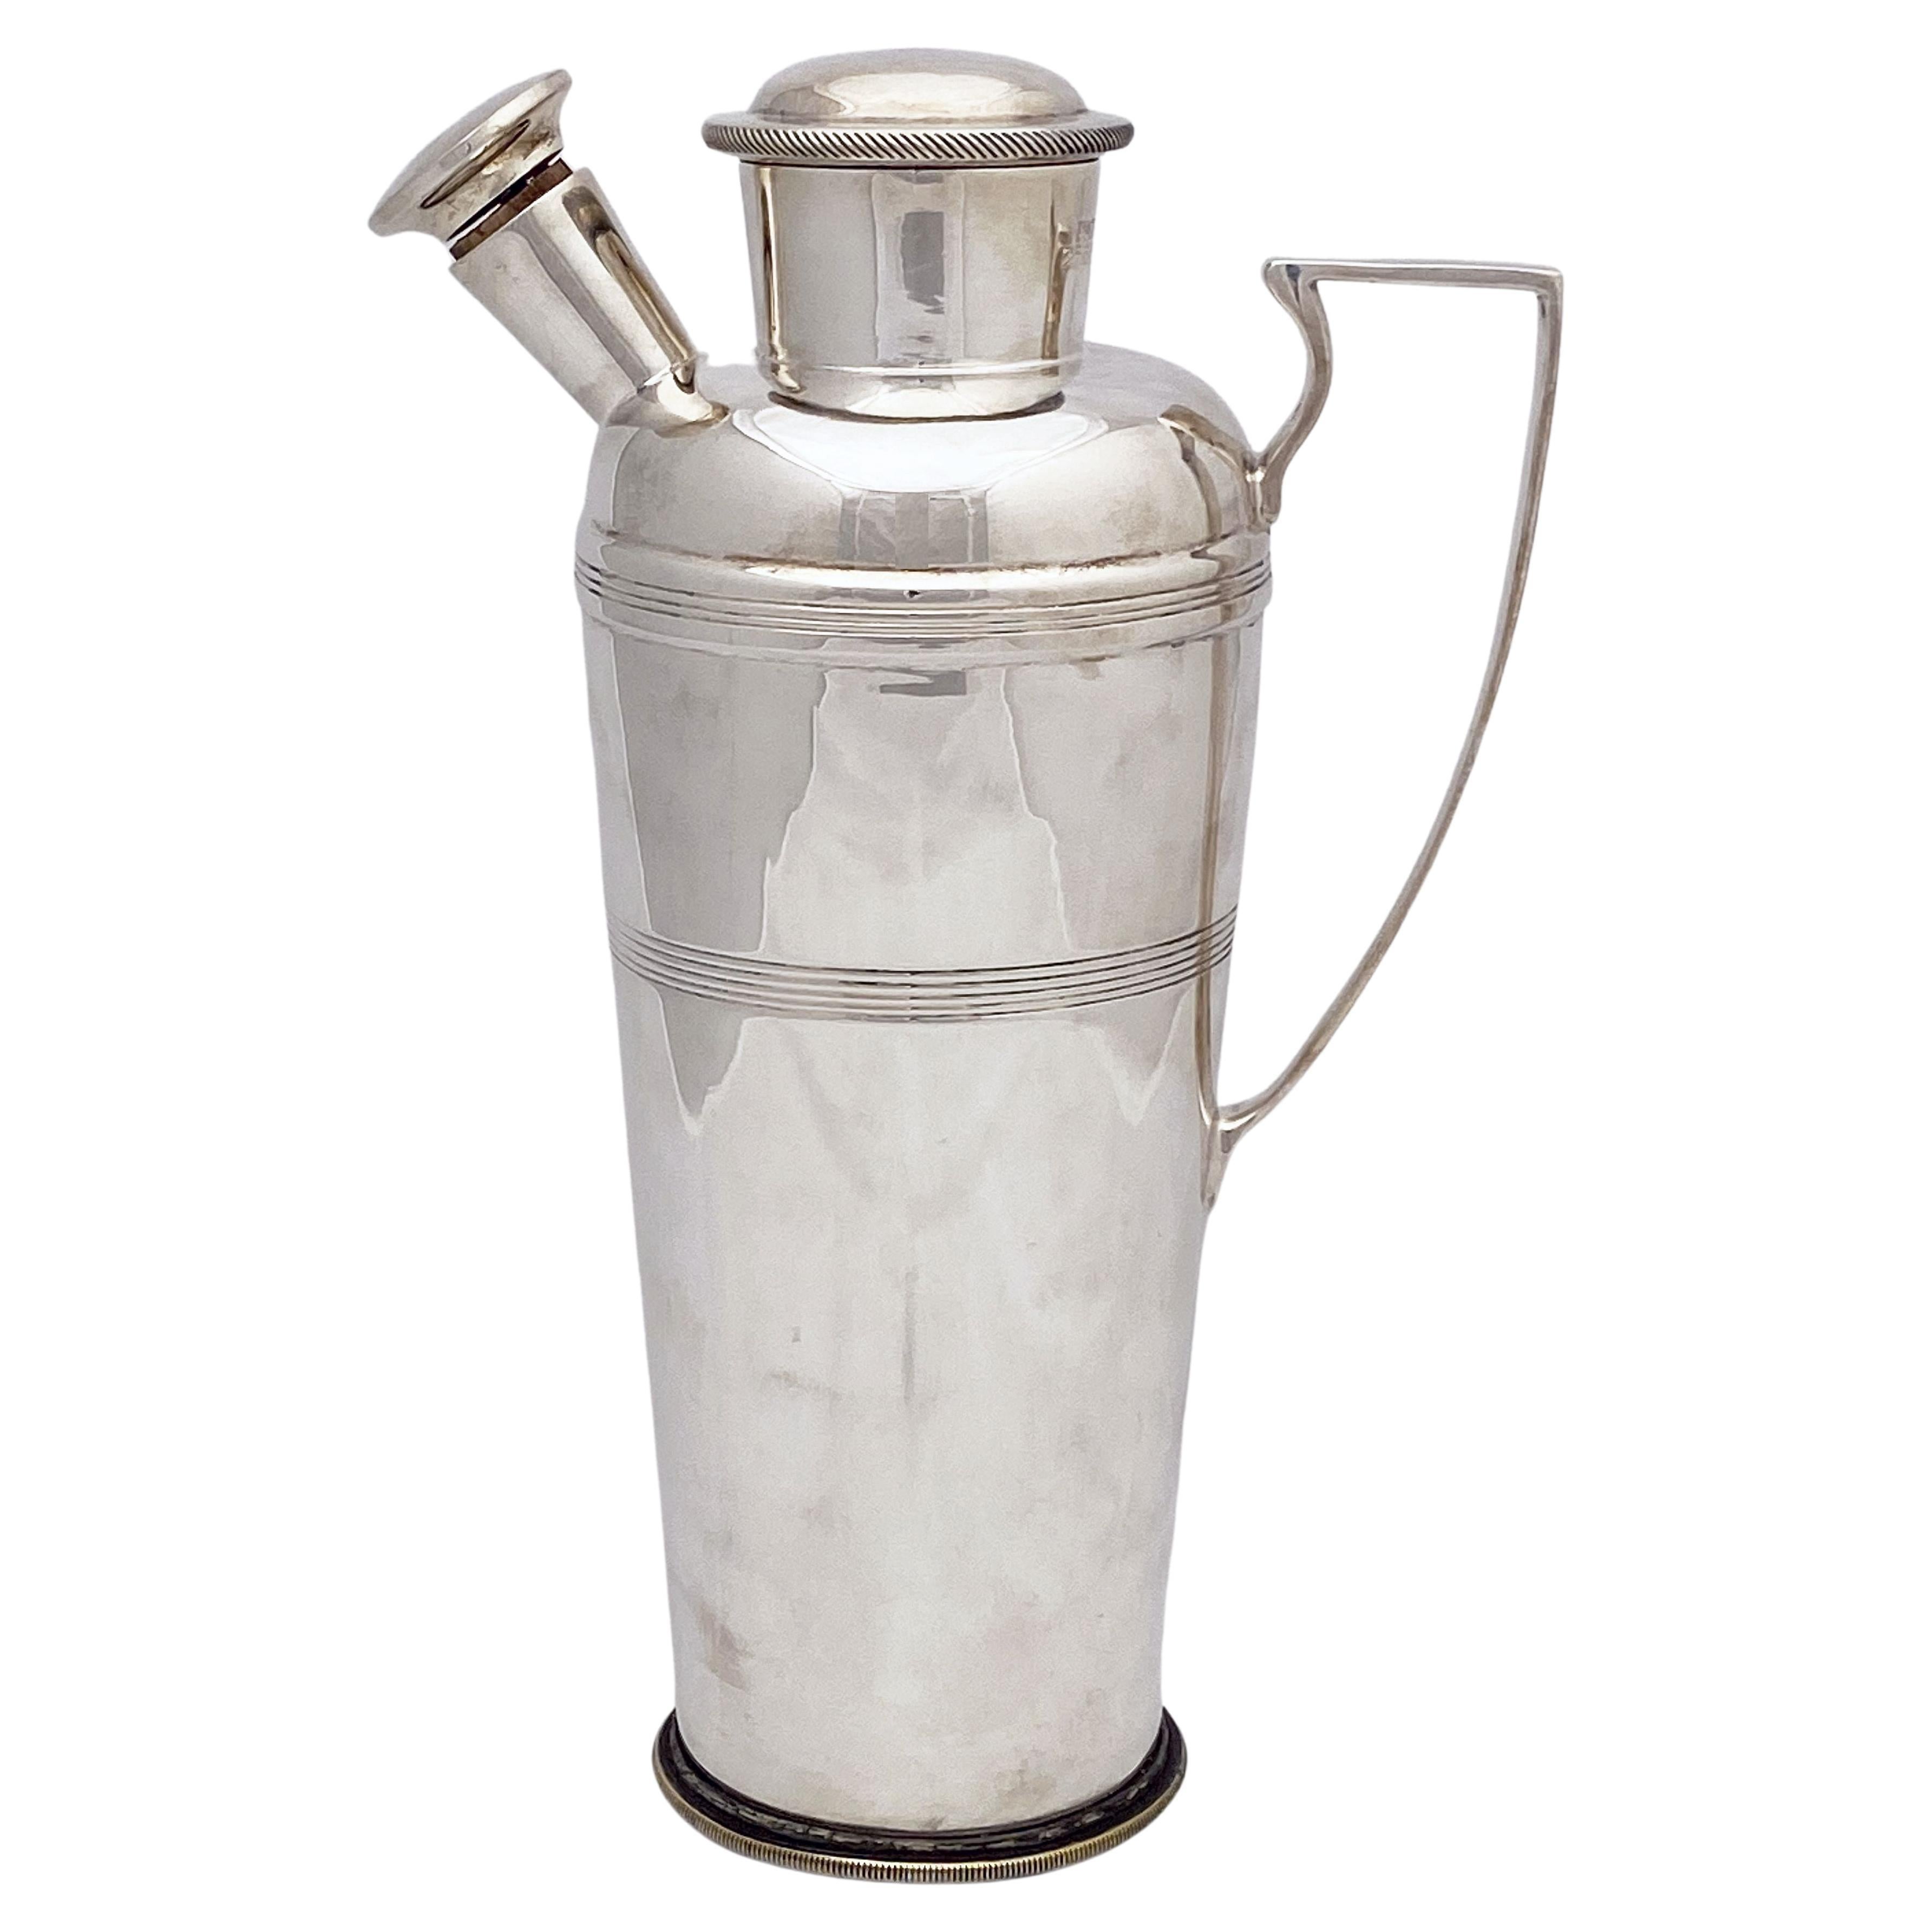 English Cocktail or Martini Shaker from the Art Deco Period